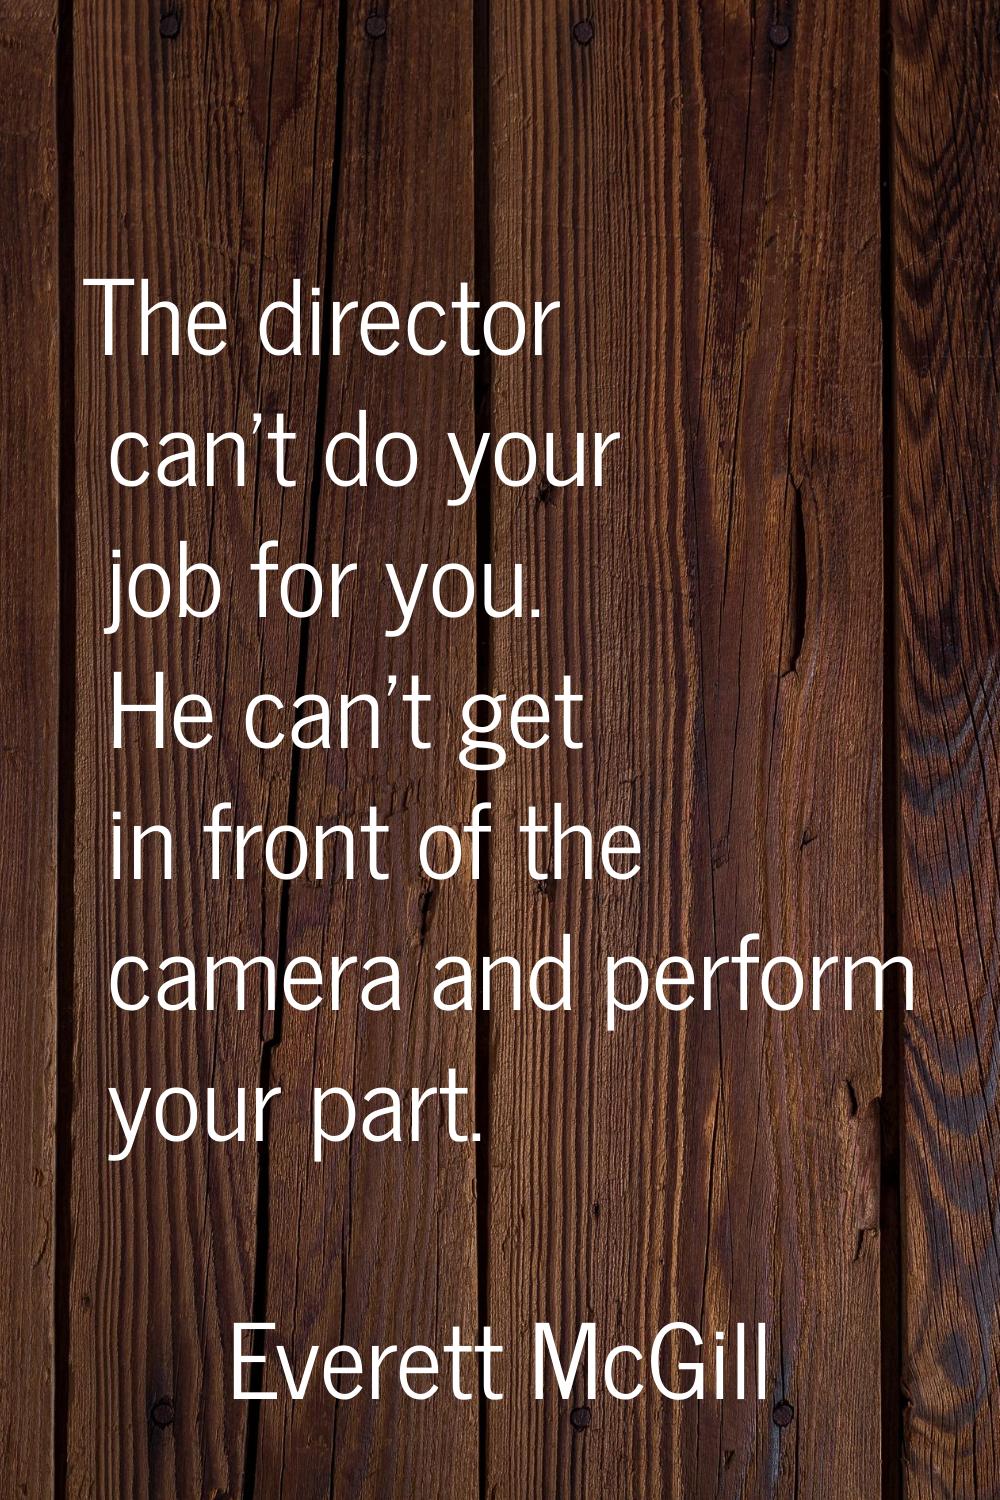 The director can't do your job for you. He can't get in front of the camera and perform your part.